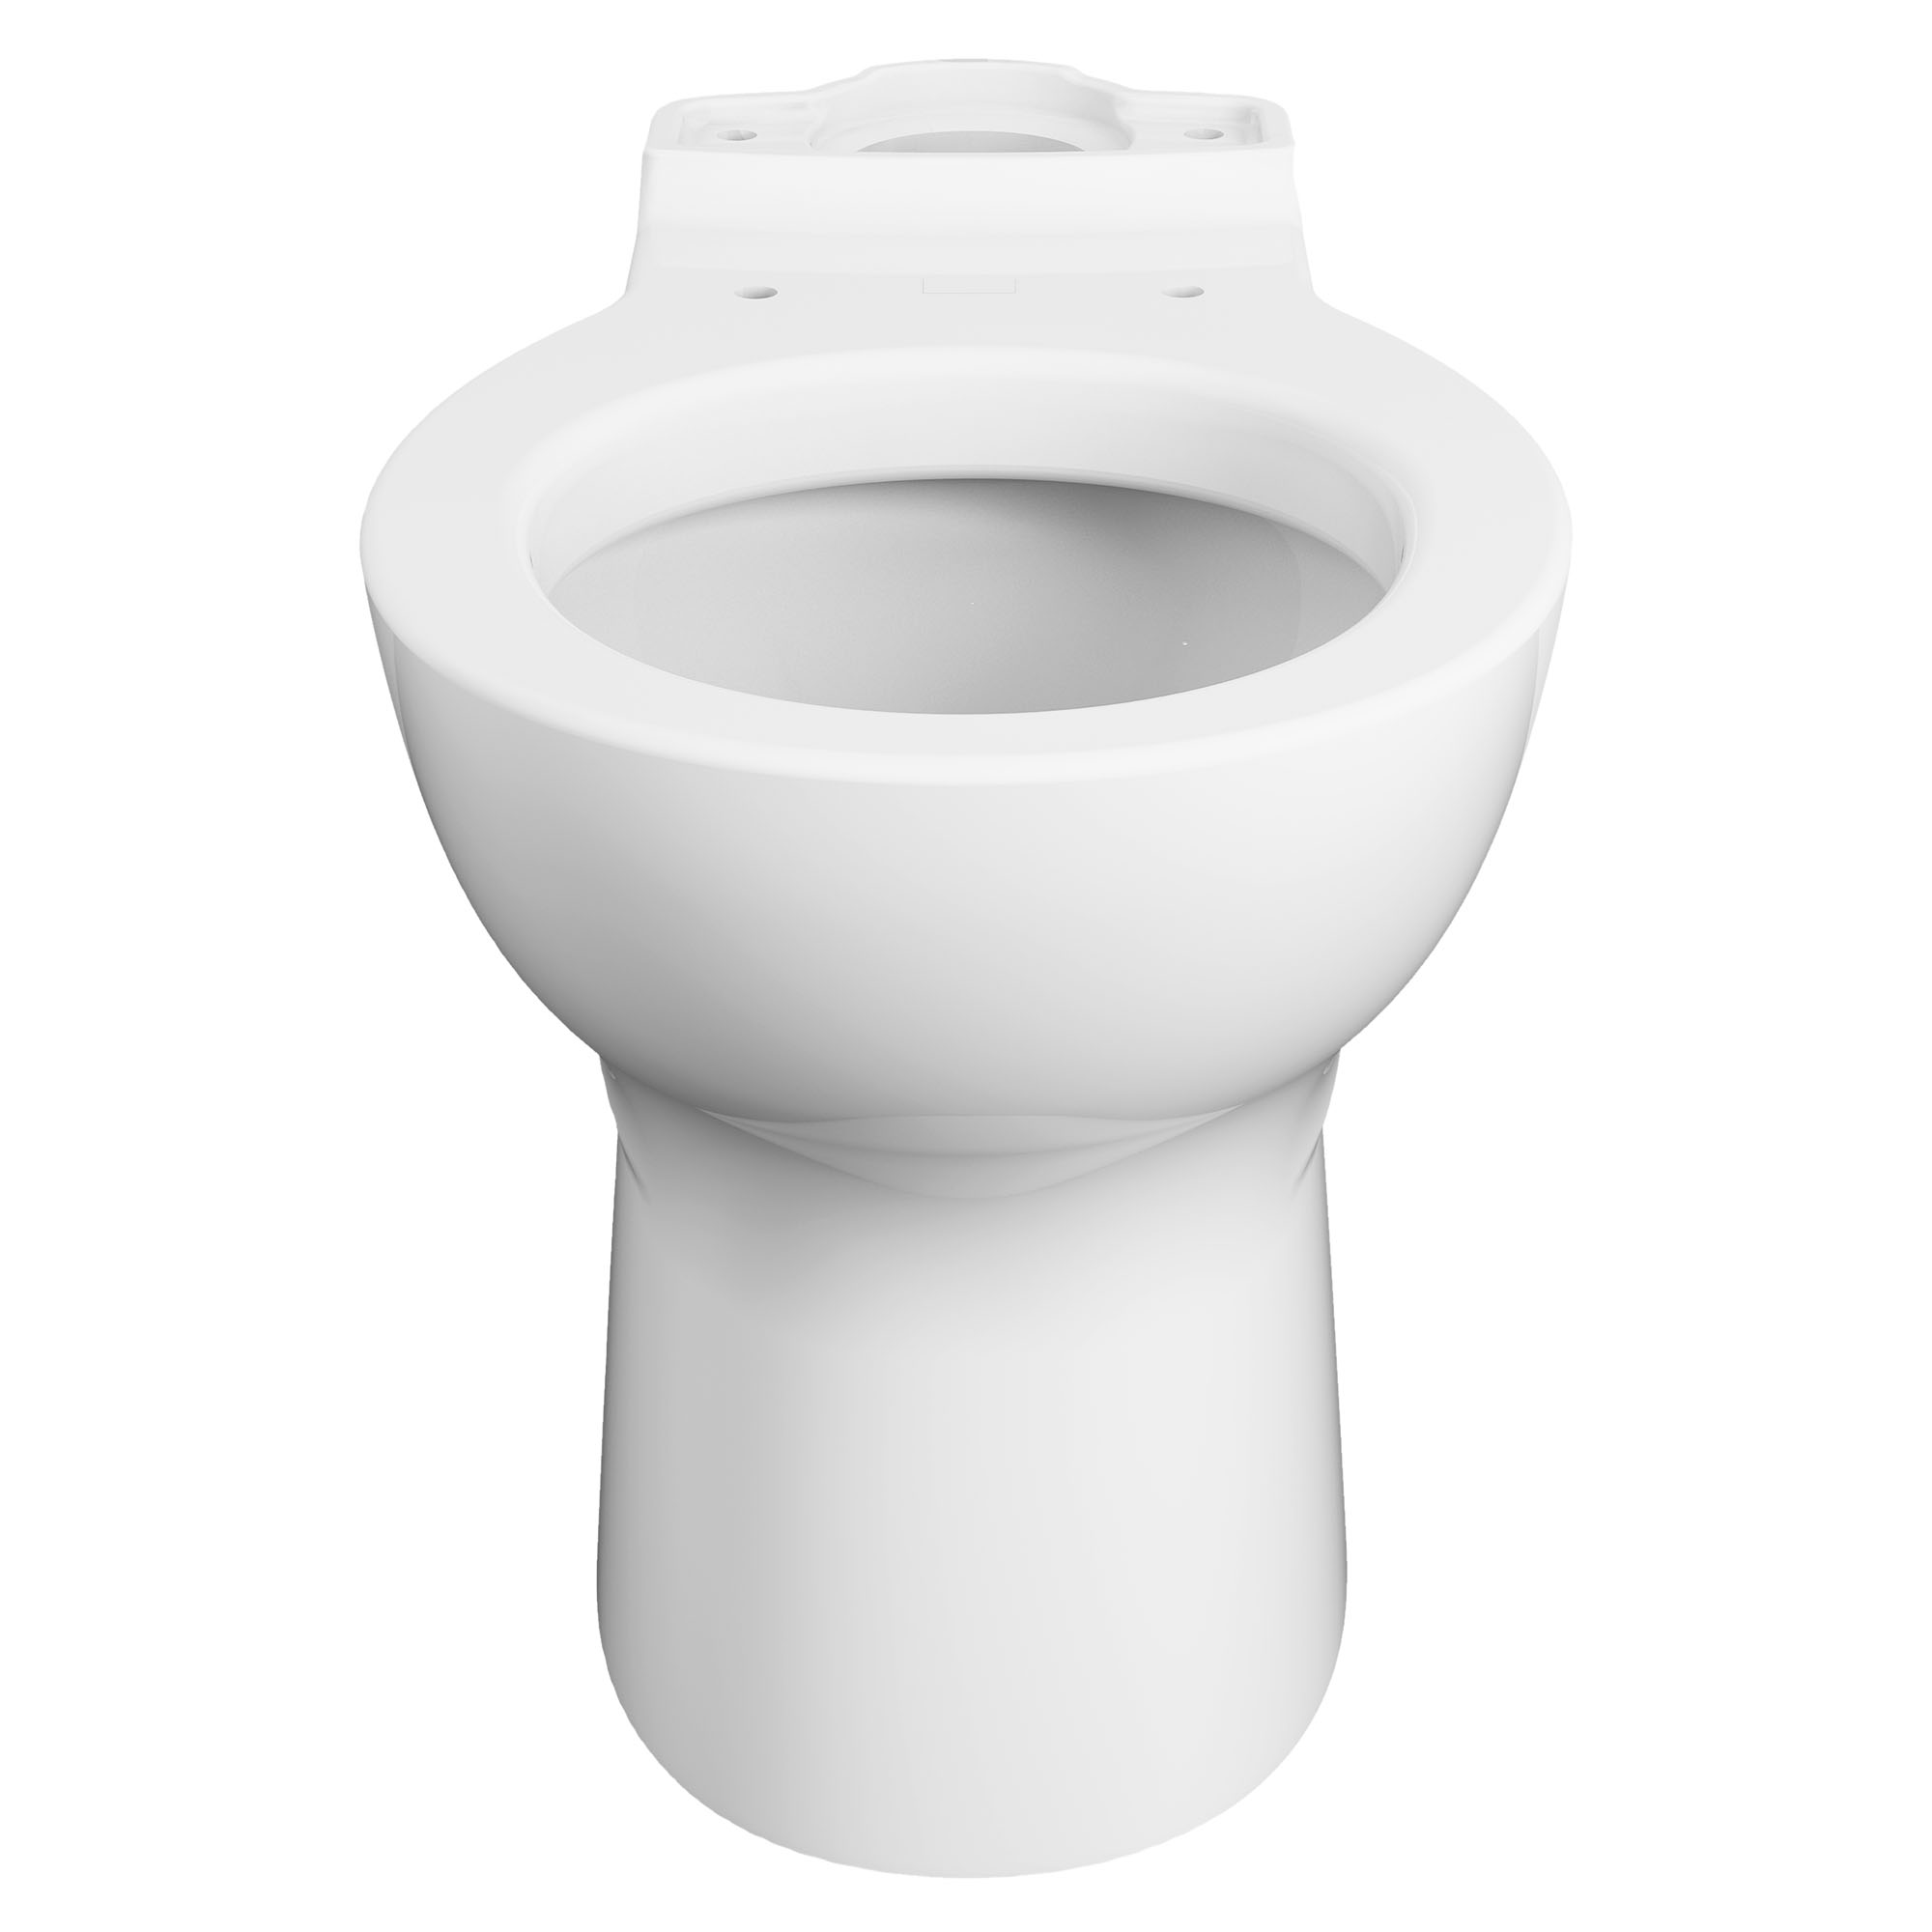 Cadet® PRO Standard Height Round Front Bowl